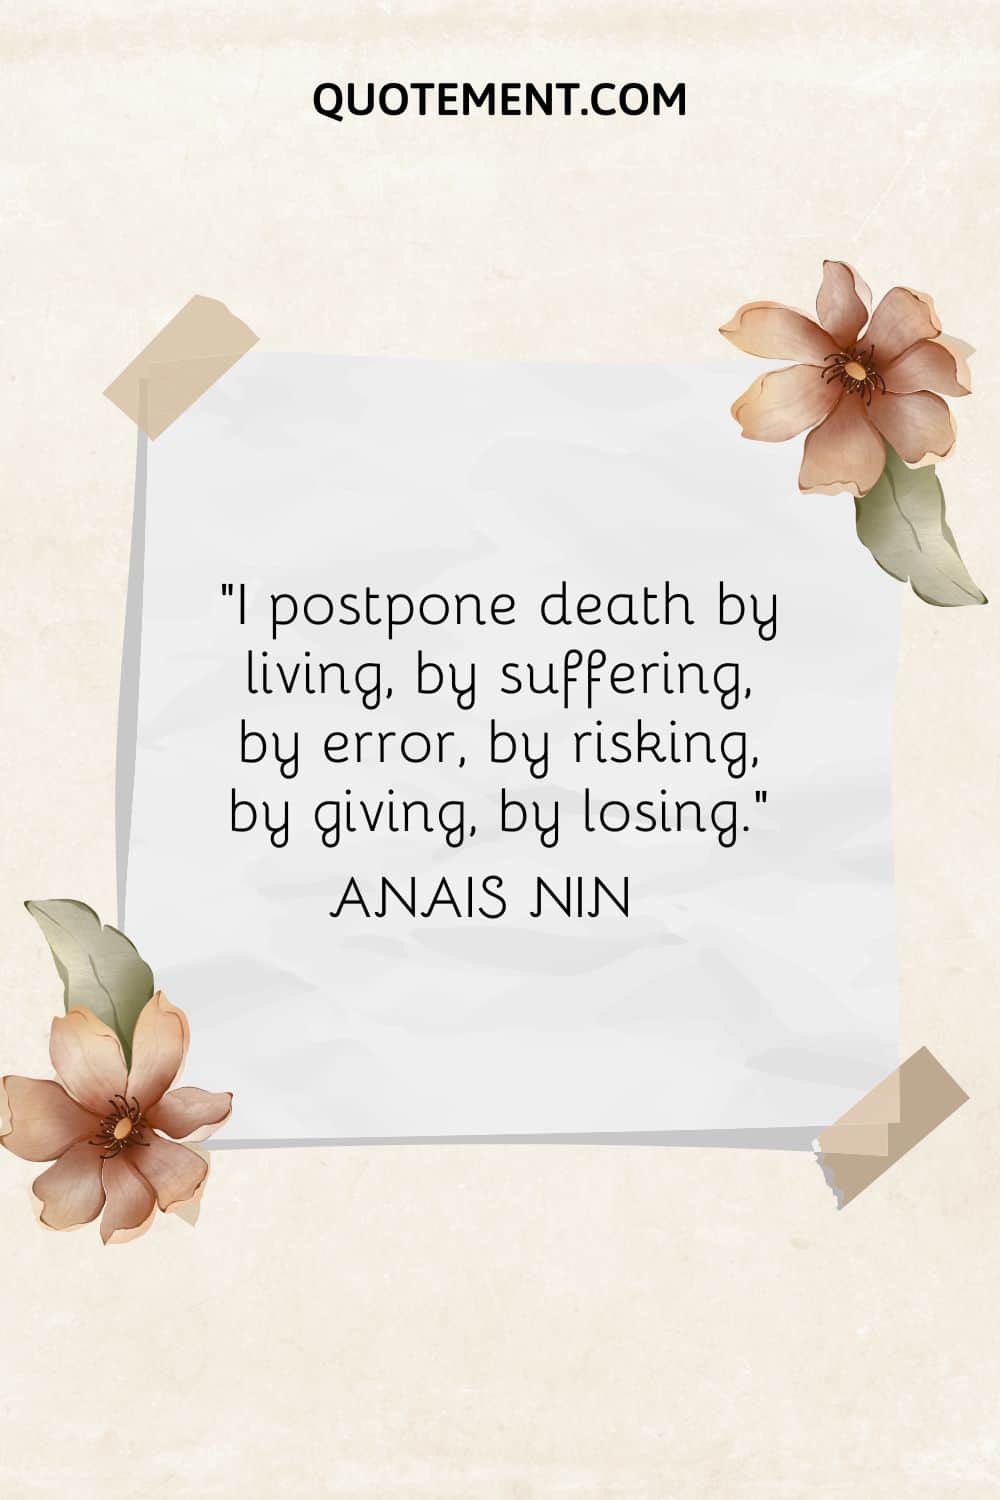 piece of paper with flowers representing Anais Nin quote